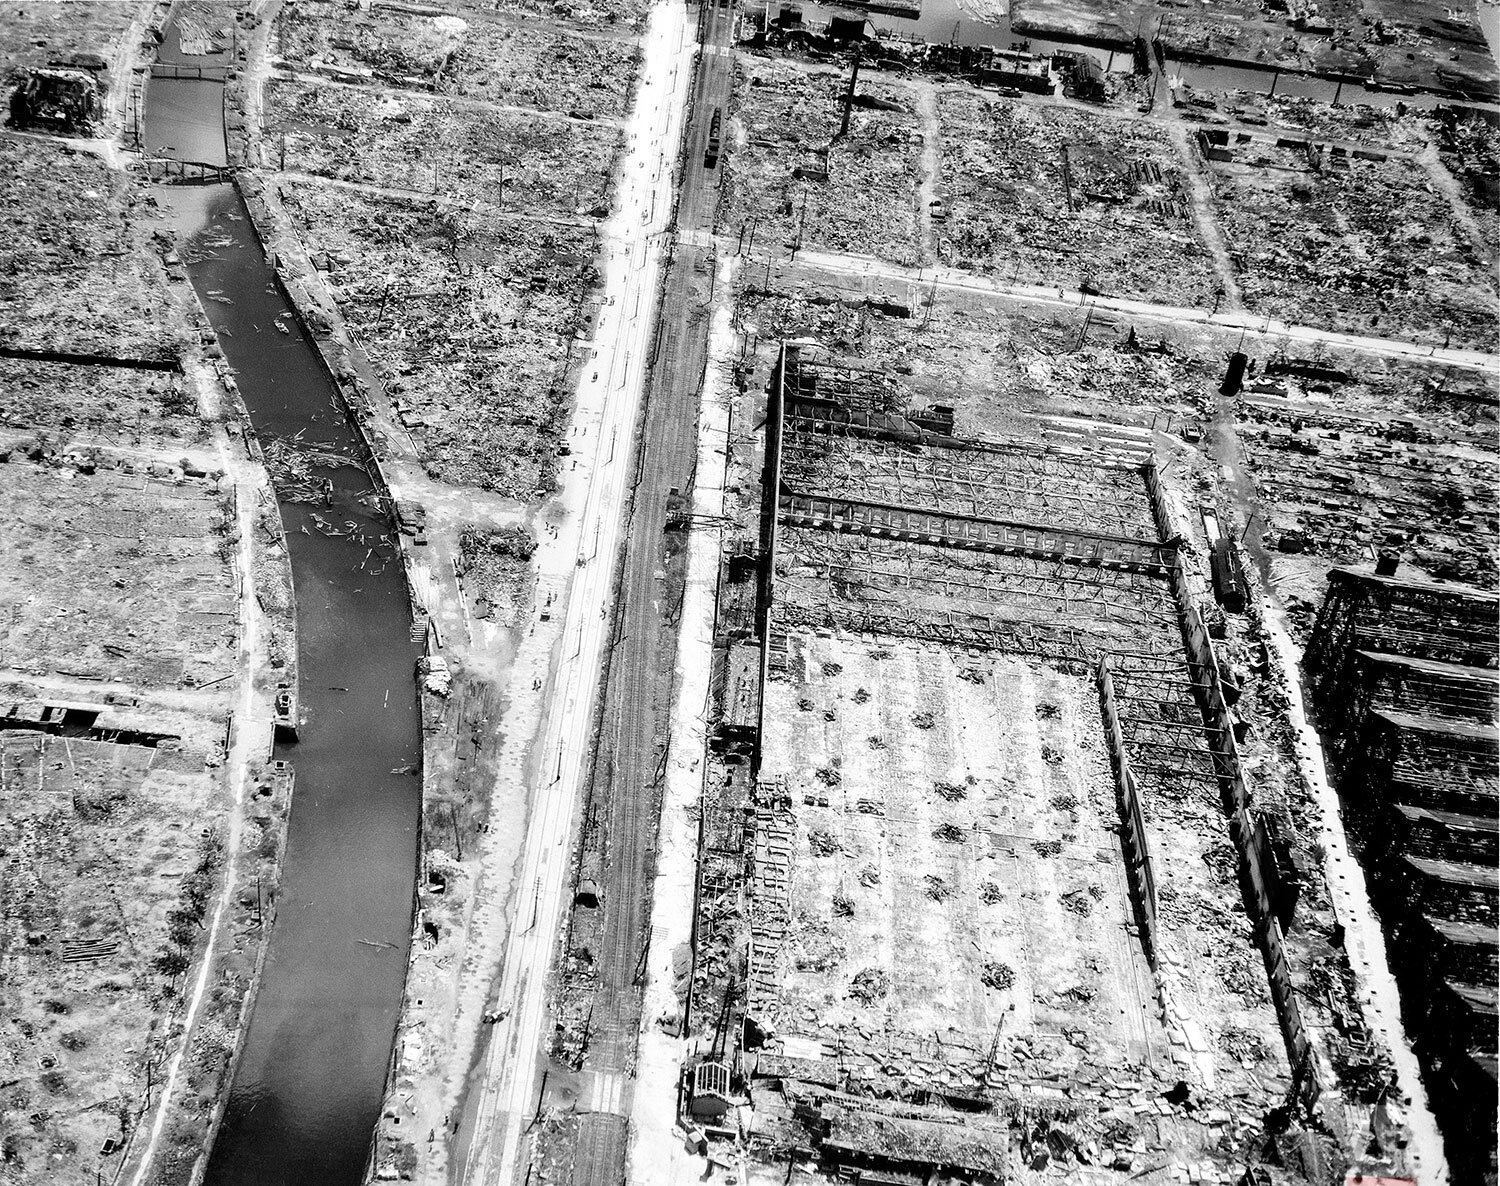  This aerial view shows the extensive damage caused by the atomic bomb dropped by the U.S. on Nagasaki, Japan, Sept. 6, 1945 in World War II.  About one-third of the Japanese city was destroyed when the atomic bomb was dropped on Aug. 9.  (AP Photo) 